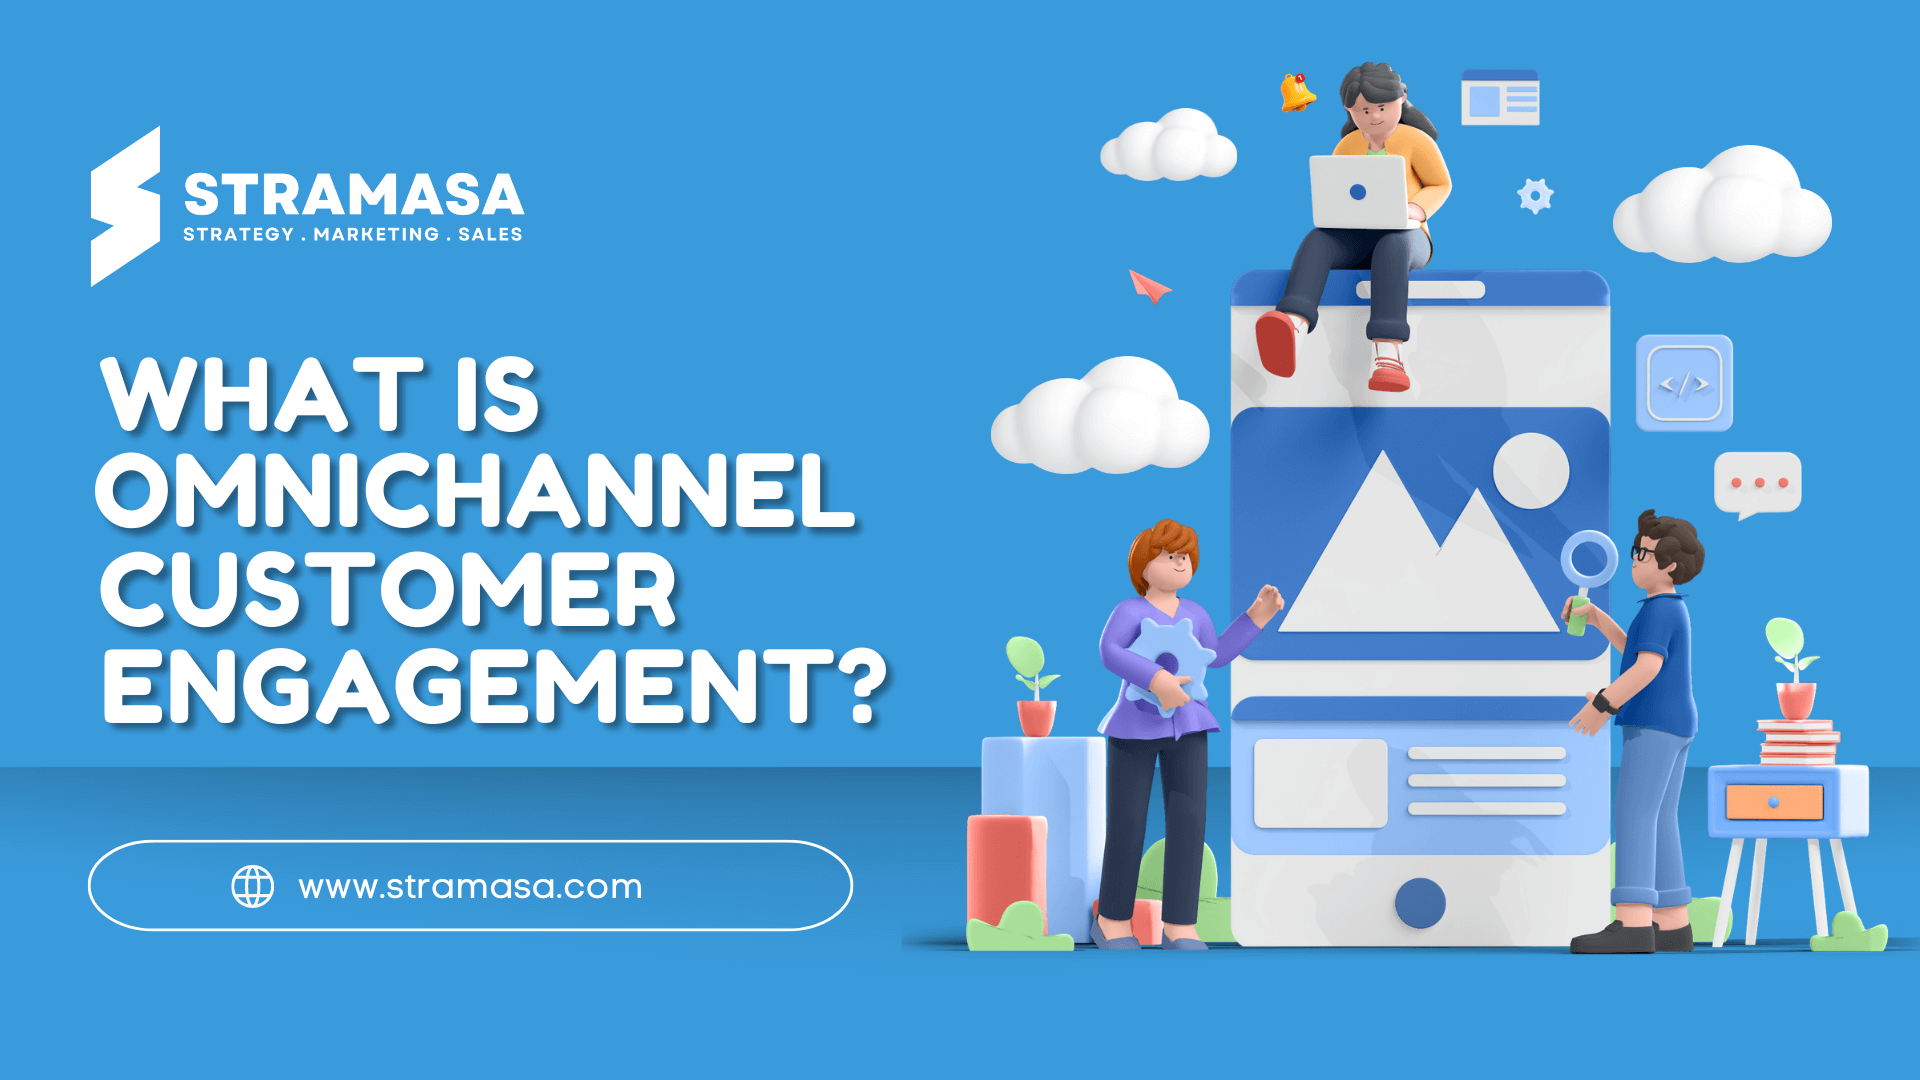 What is Omnichannel Customer Engagement